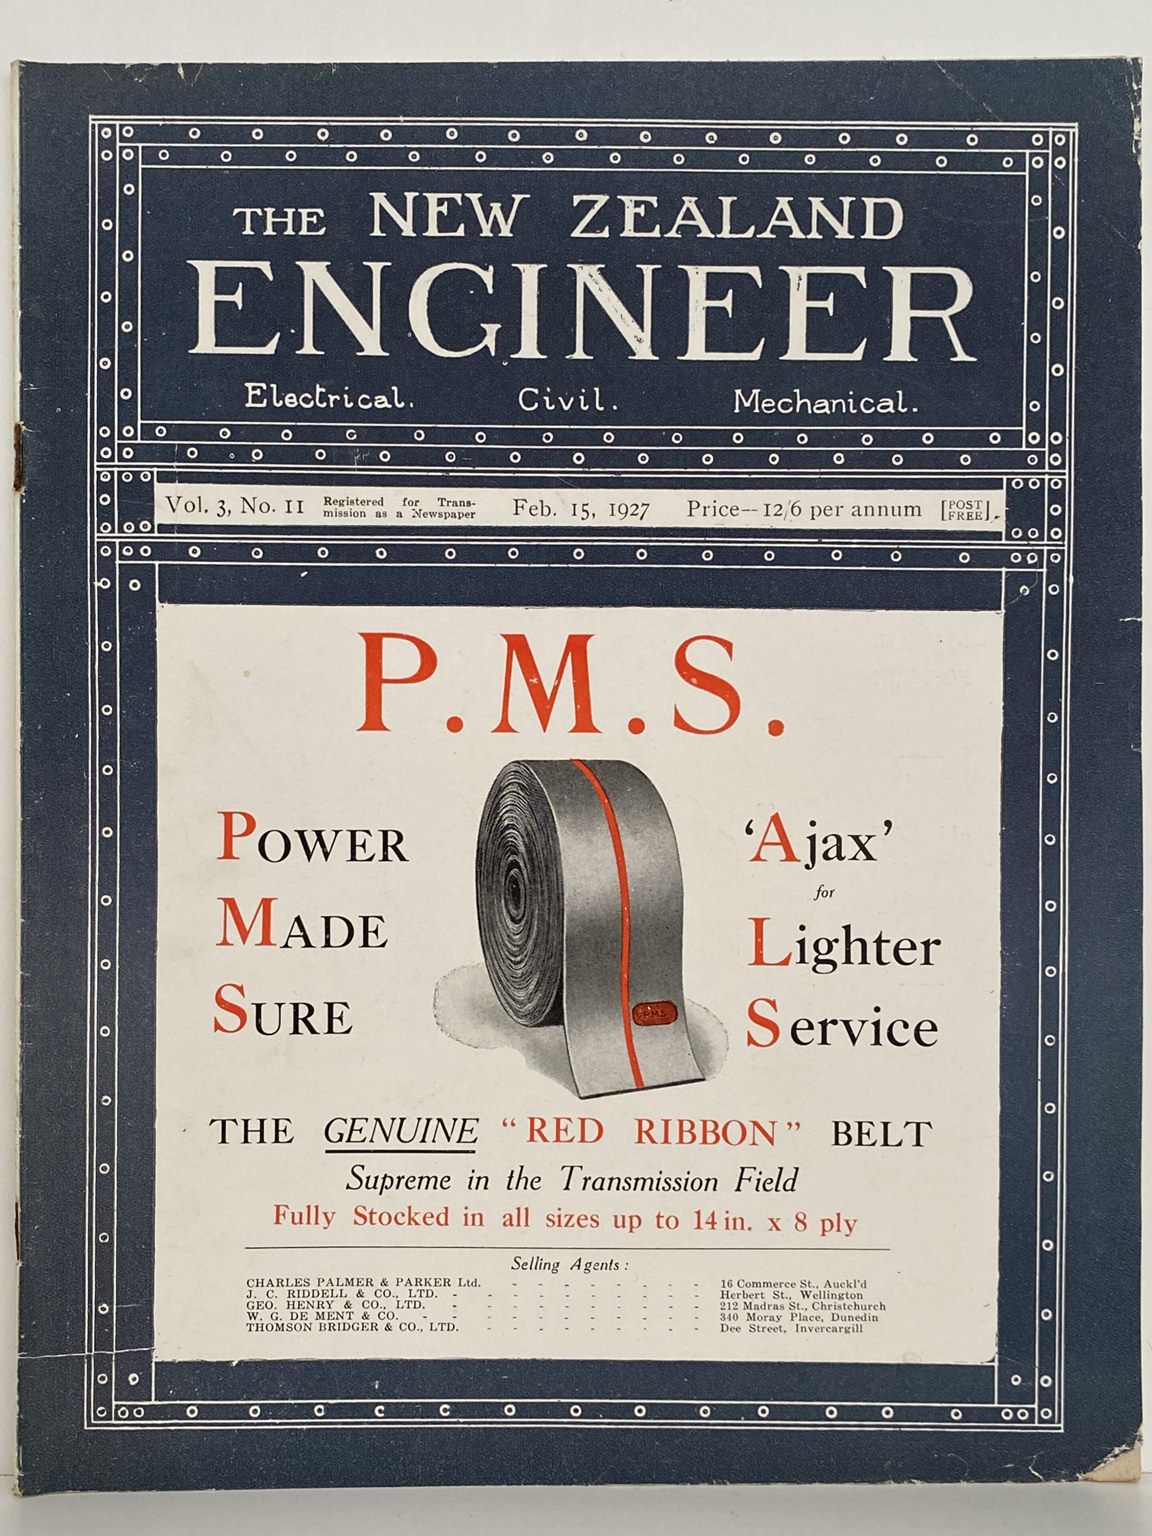 OLD MAGAZINE: The New Zealand Engineer Vol. 3, No. 11 - 15 February 1927